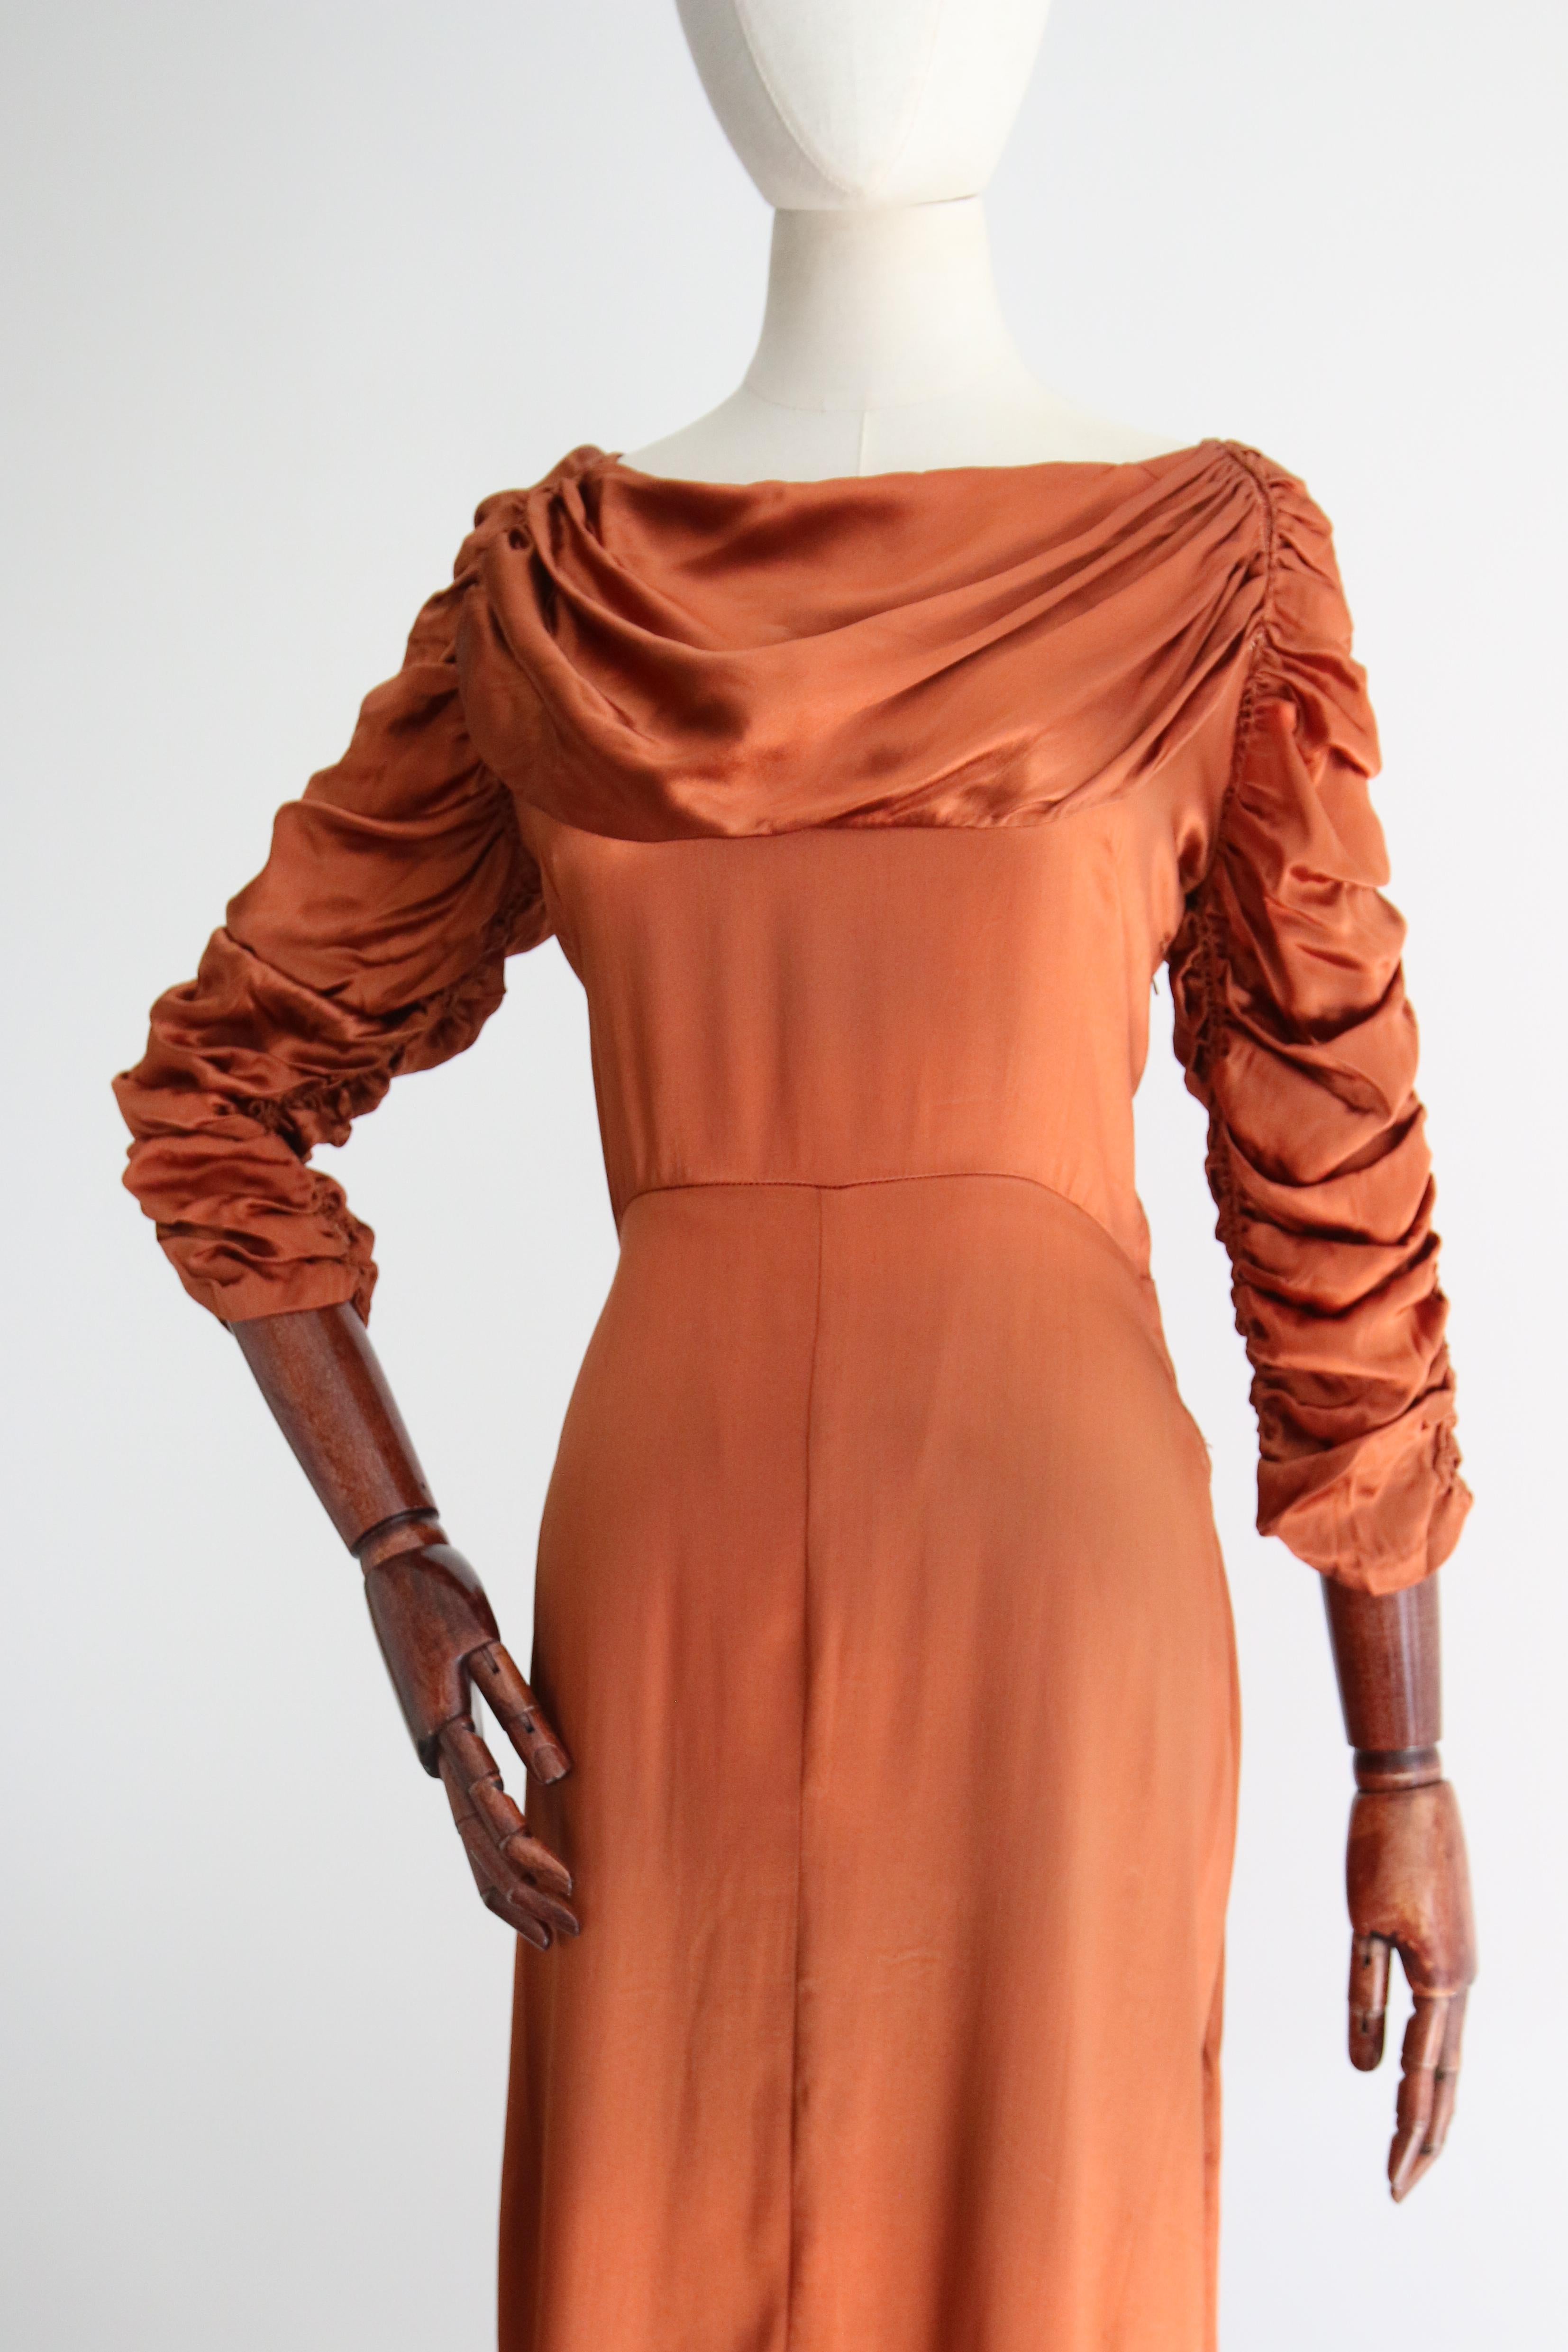 Vintage 1930's Pleated & Ruched Amber Satin Dress UK 10 US 6 For Sale 2